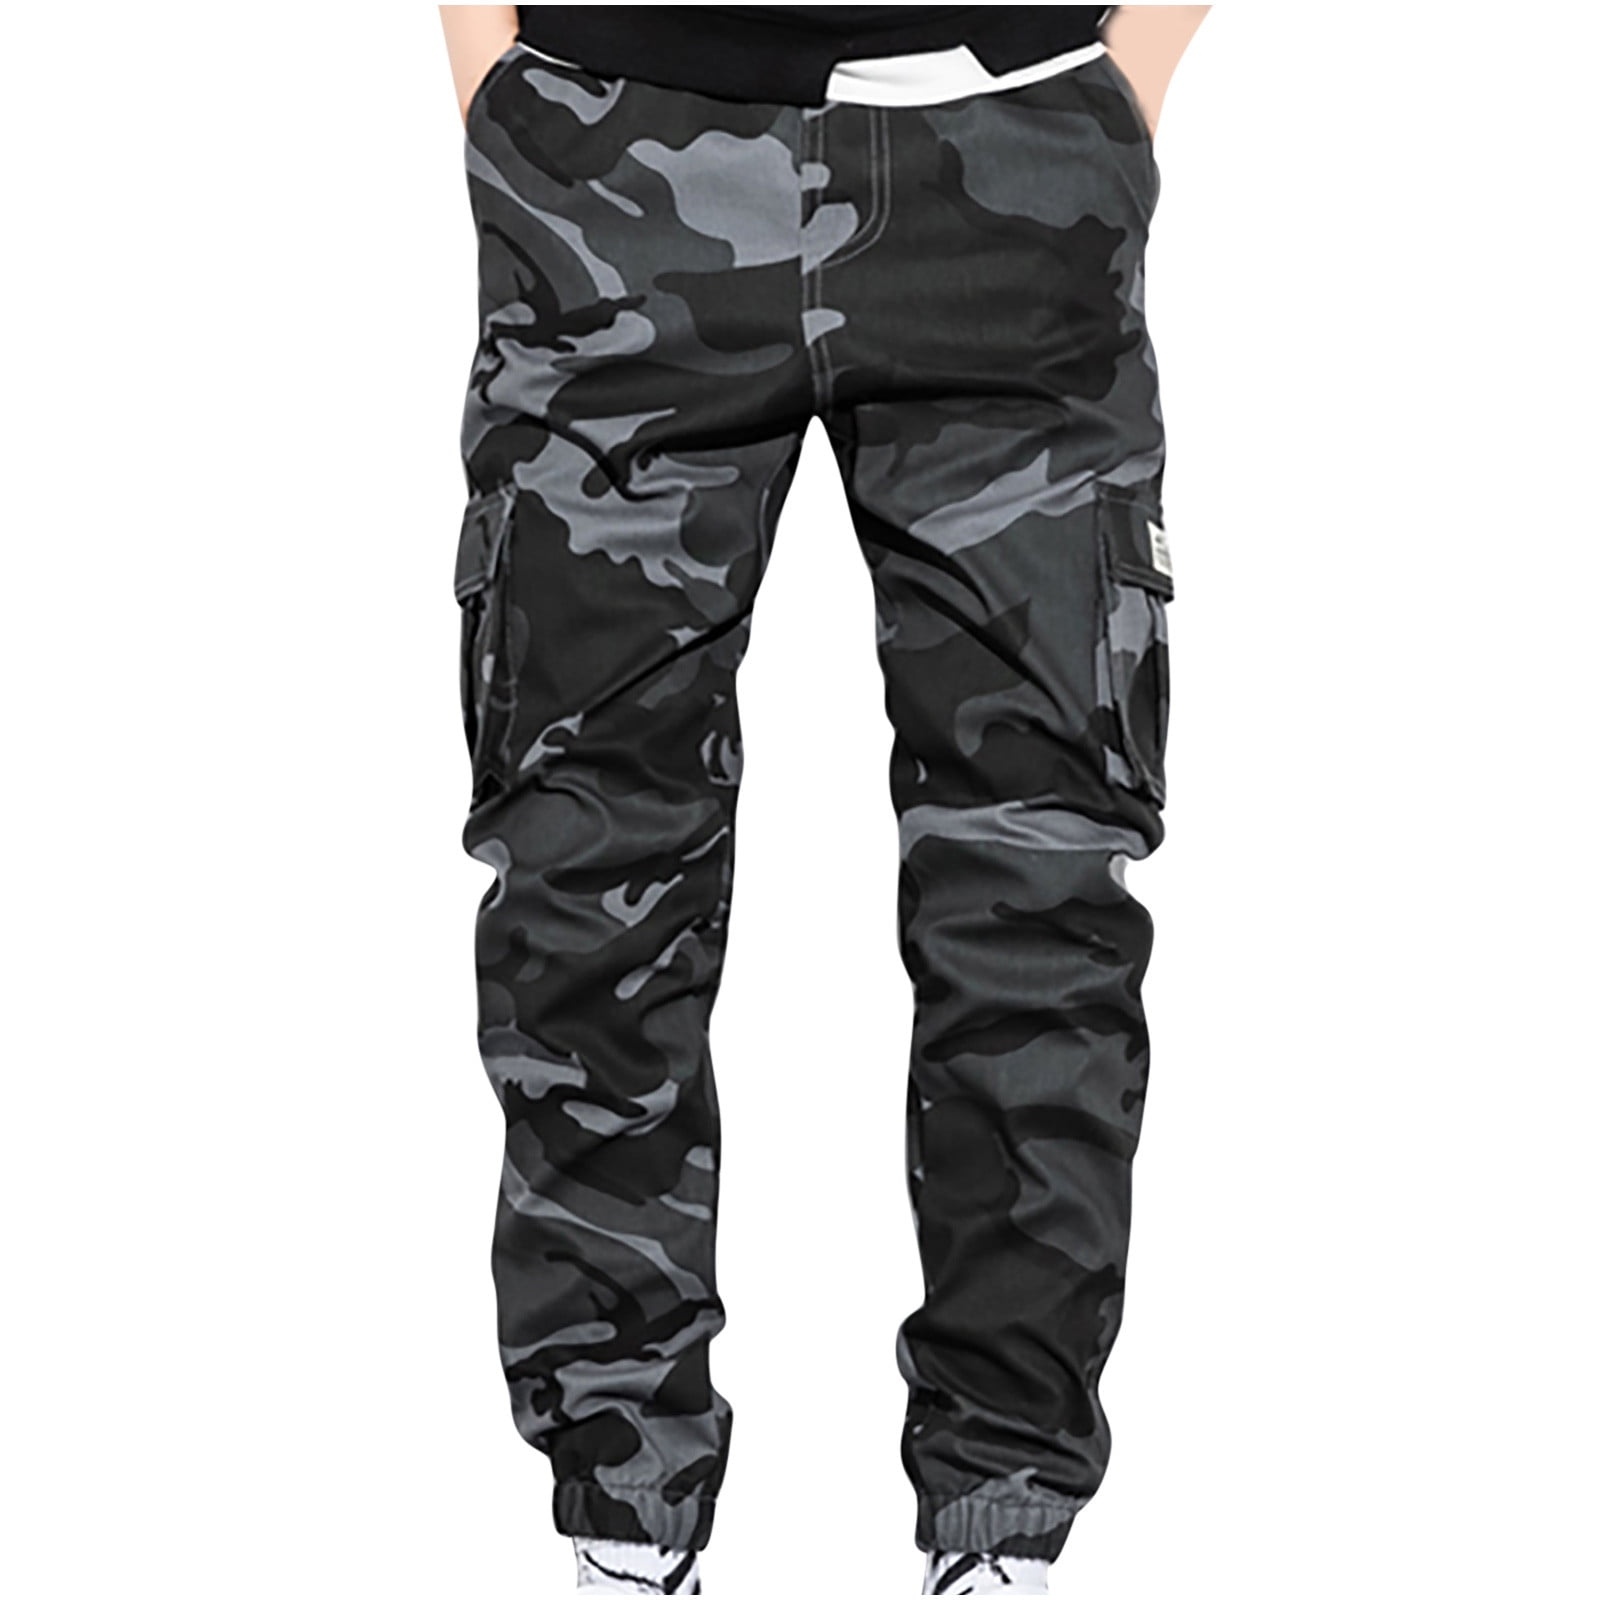 Clearance RYRJJ Men's Outdoor Wear-Resistant Cargo Pants Relaxed Fit  Tactical Combat Cargo Work Pants Trousers with Multi Pocket(Black,5XL)